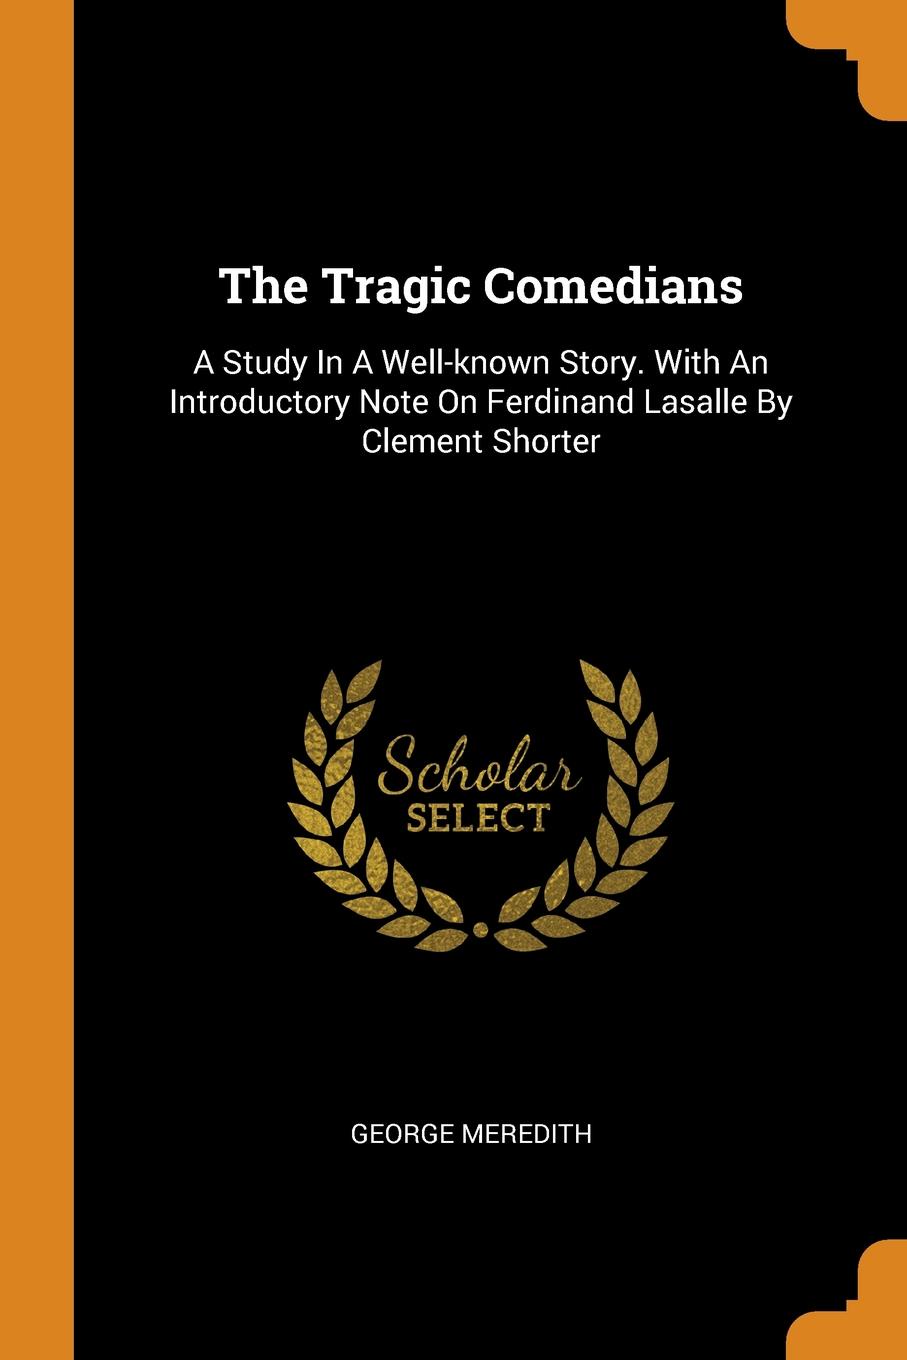 The Tragic Comedians. A Study In A Well-known Story. With An Introductory Note On Ferdinand Lasalle By Clement Shorter